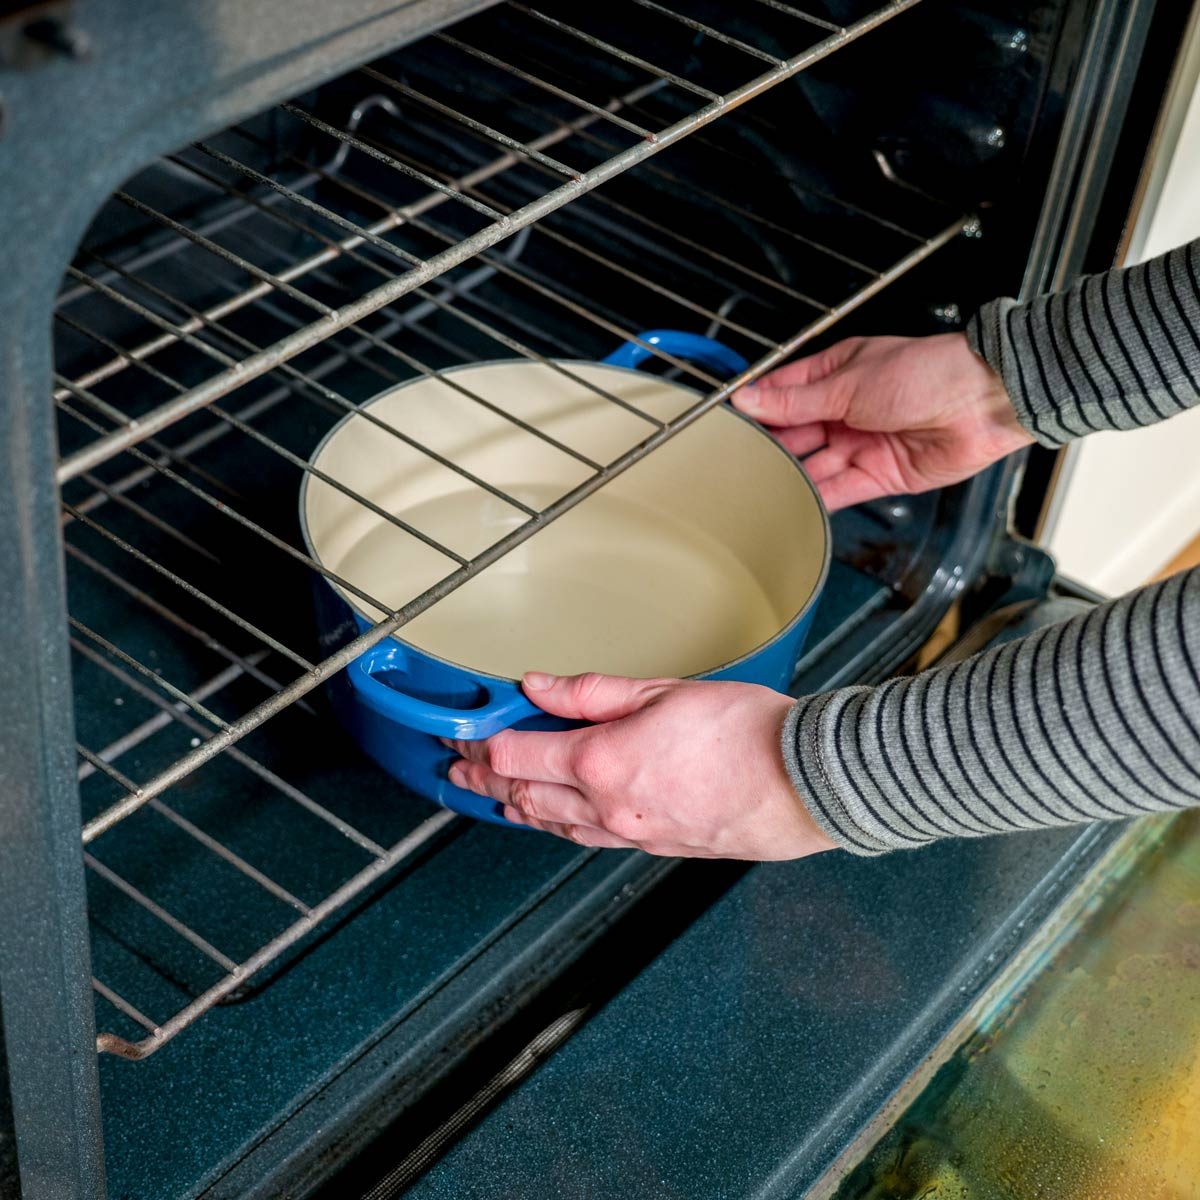 How To Steam Clean Your Oven The Family Handyman